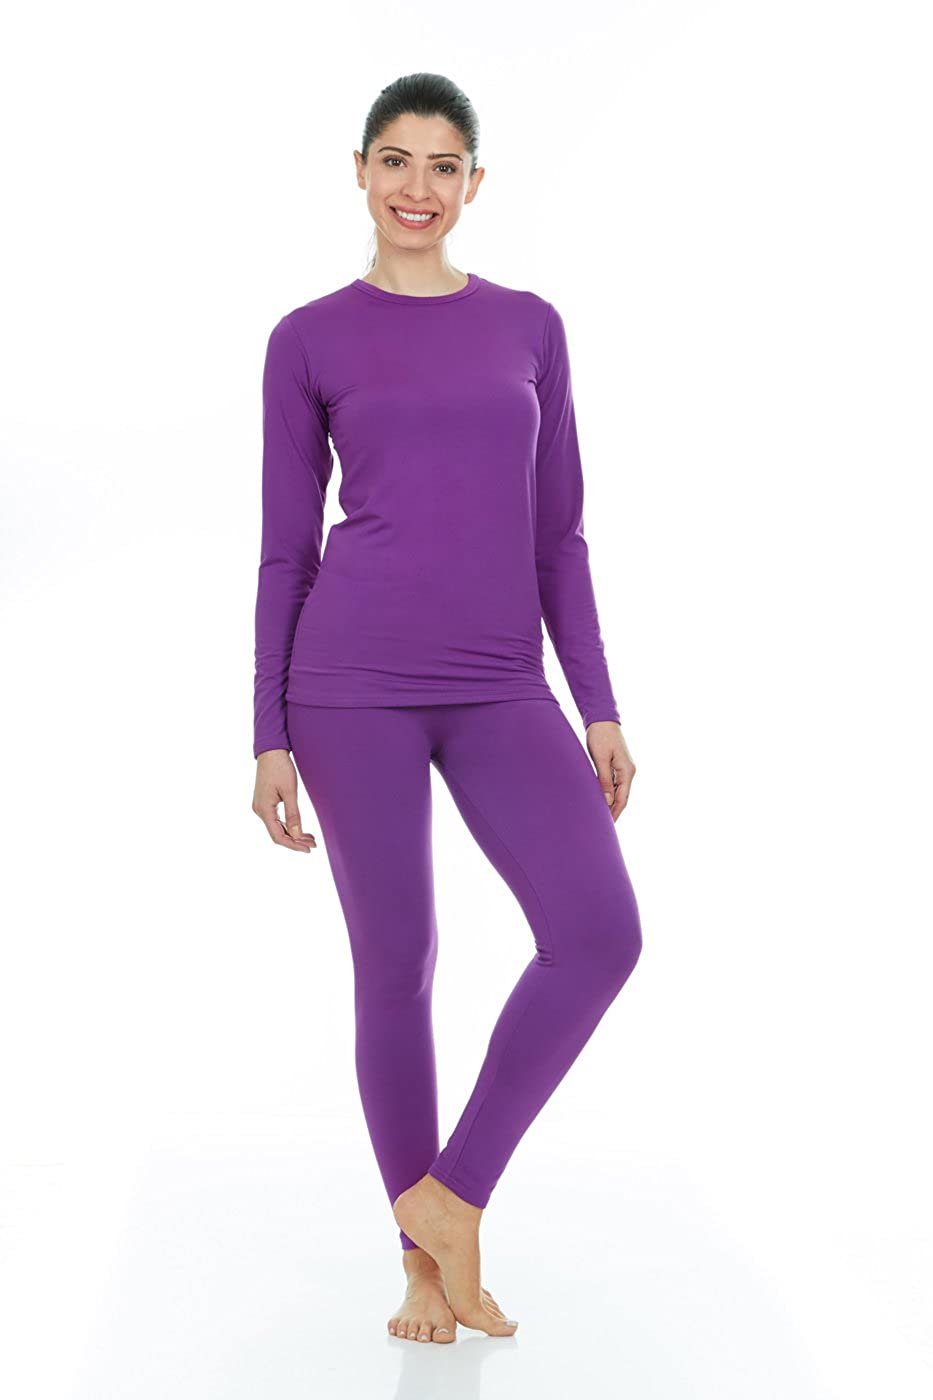 Thermajane Women's Ultra Soft Thermal Underwear Long Johns Set with Fleece  Lined